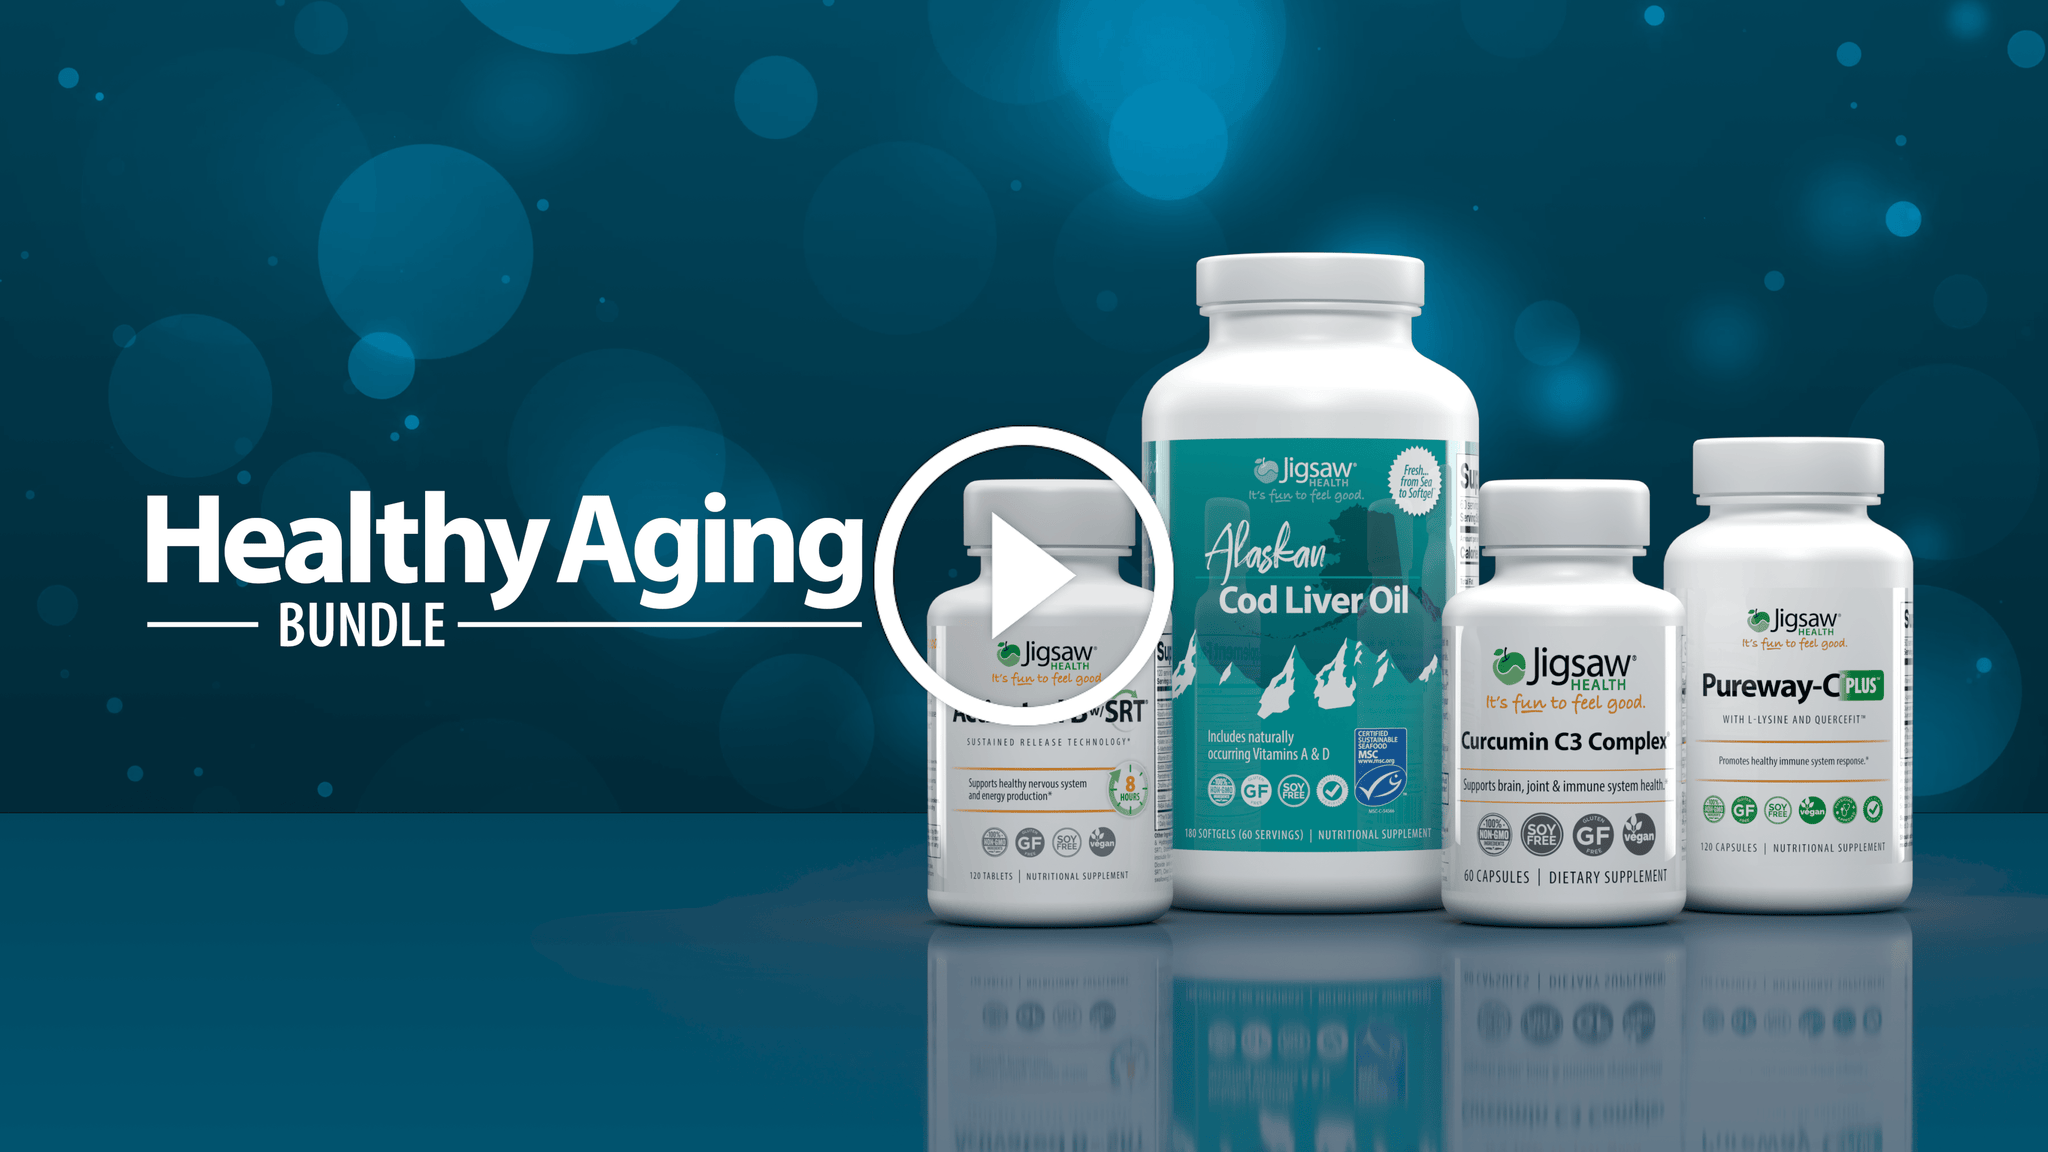 What is the Healthy Aging Bundle?